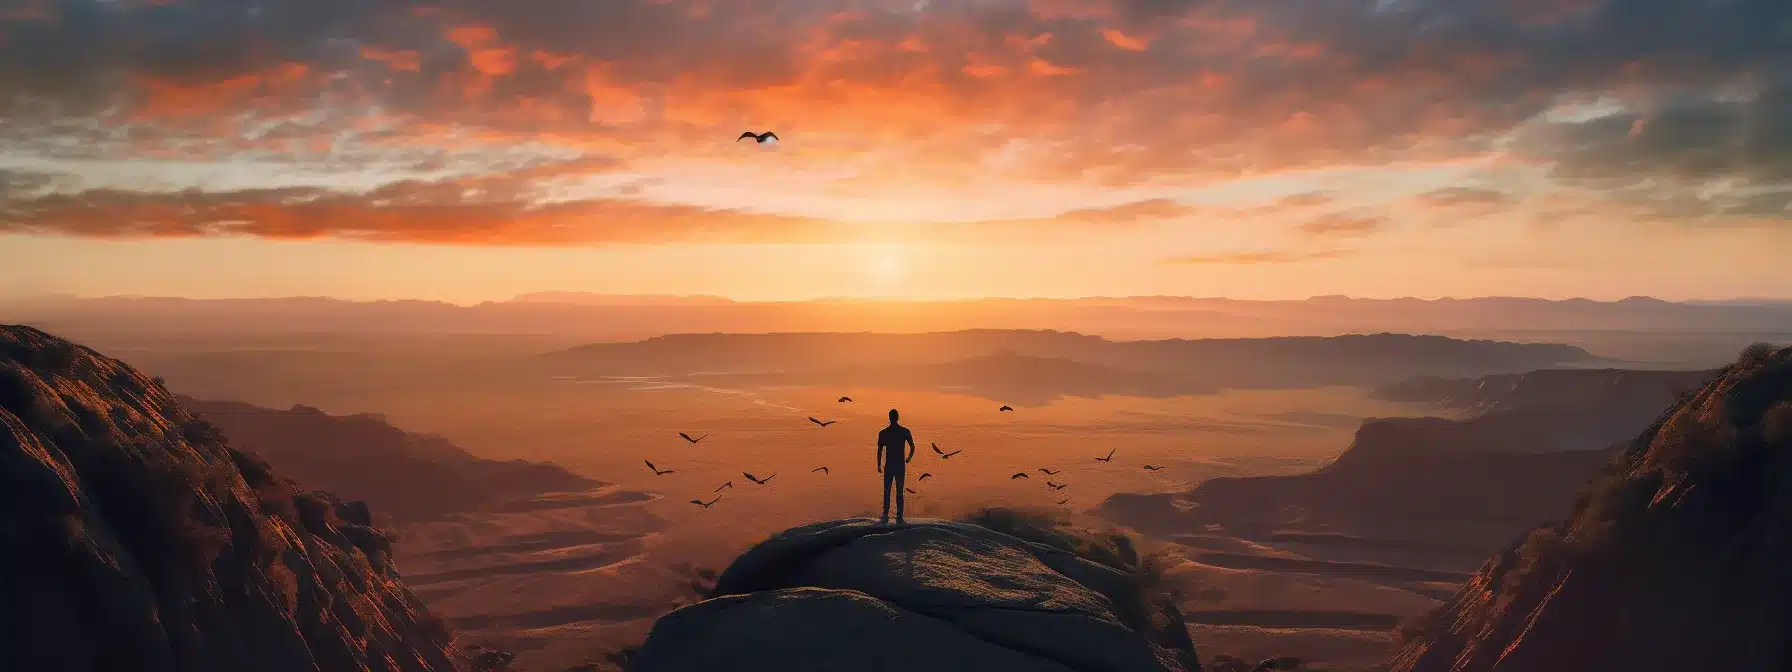 A Person Standing On The Edge Of A Digital Cliff, Overlooking A Vast And Ever-Changing Digital Landscape, Preparing To Take Flight With Their Brand.